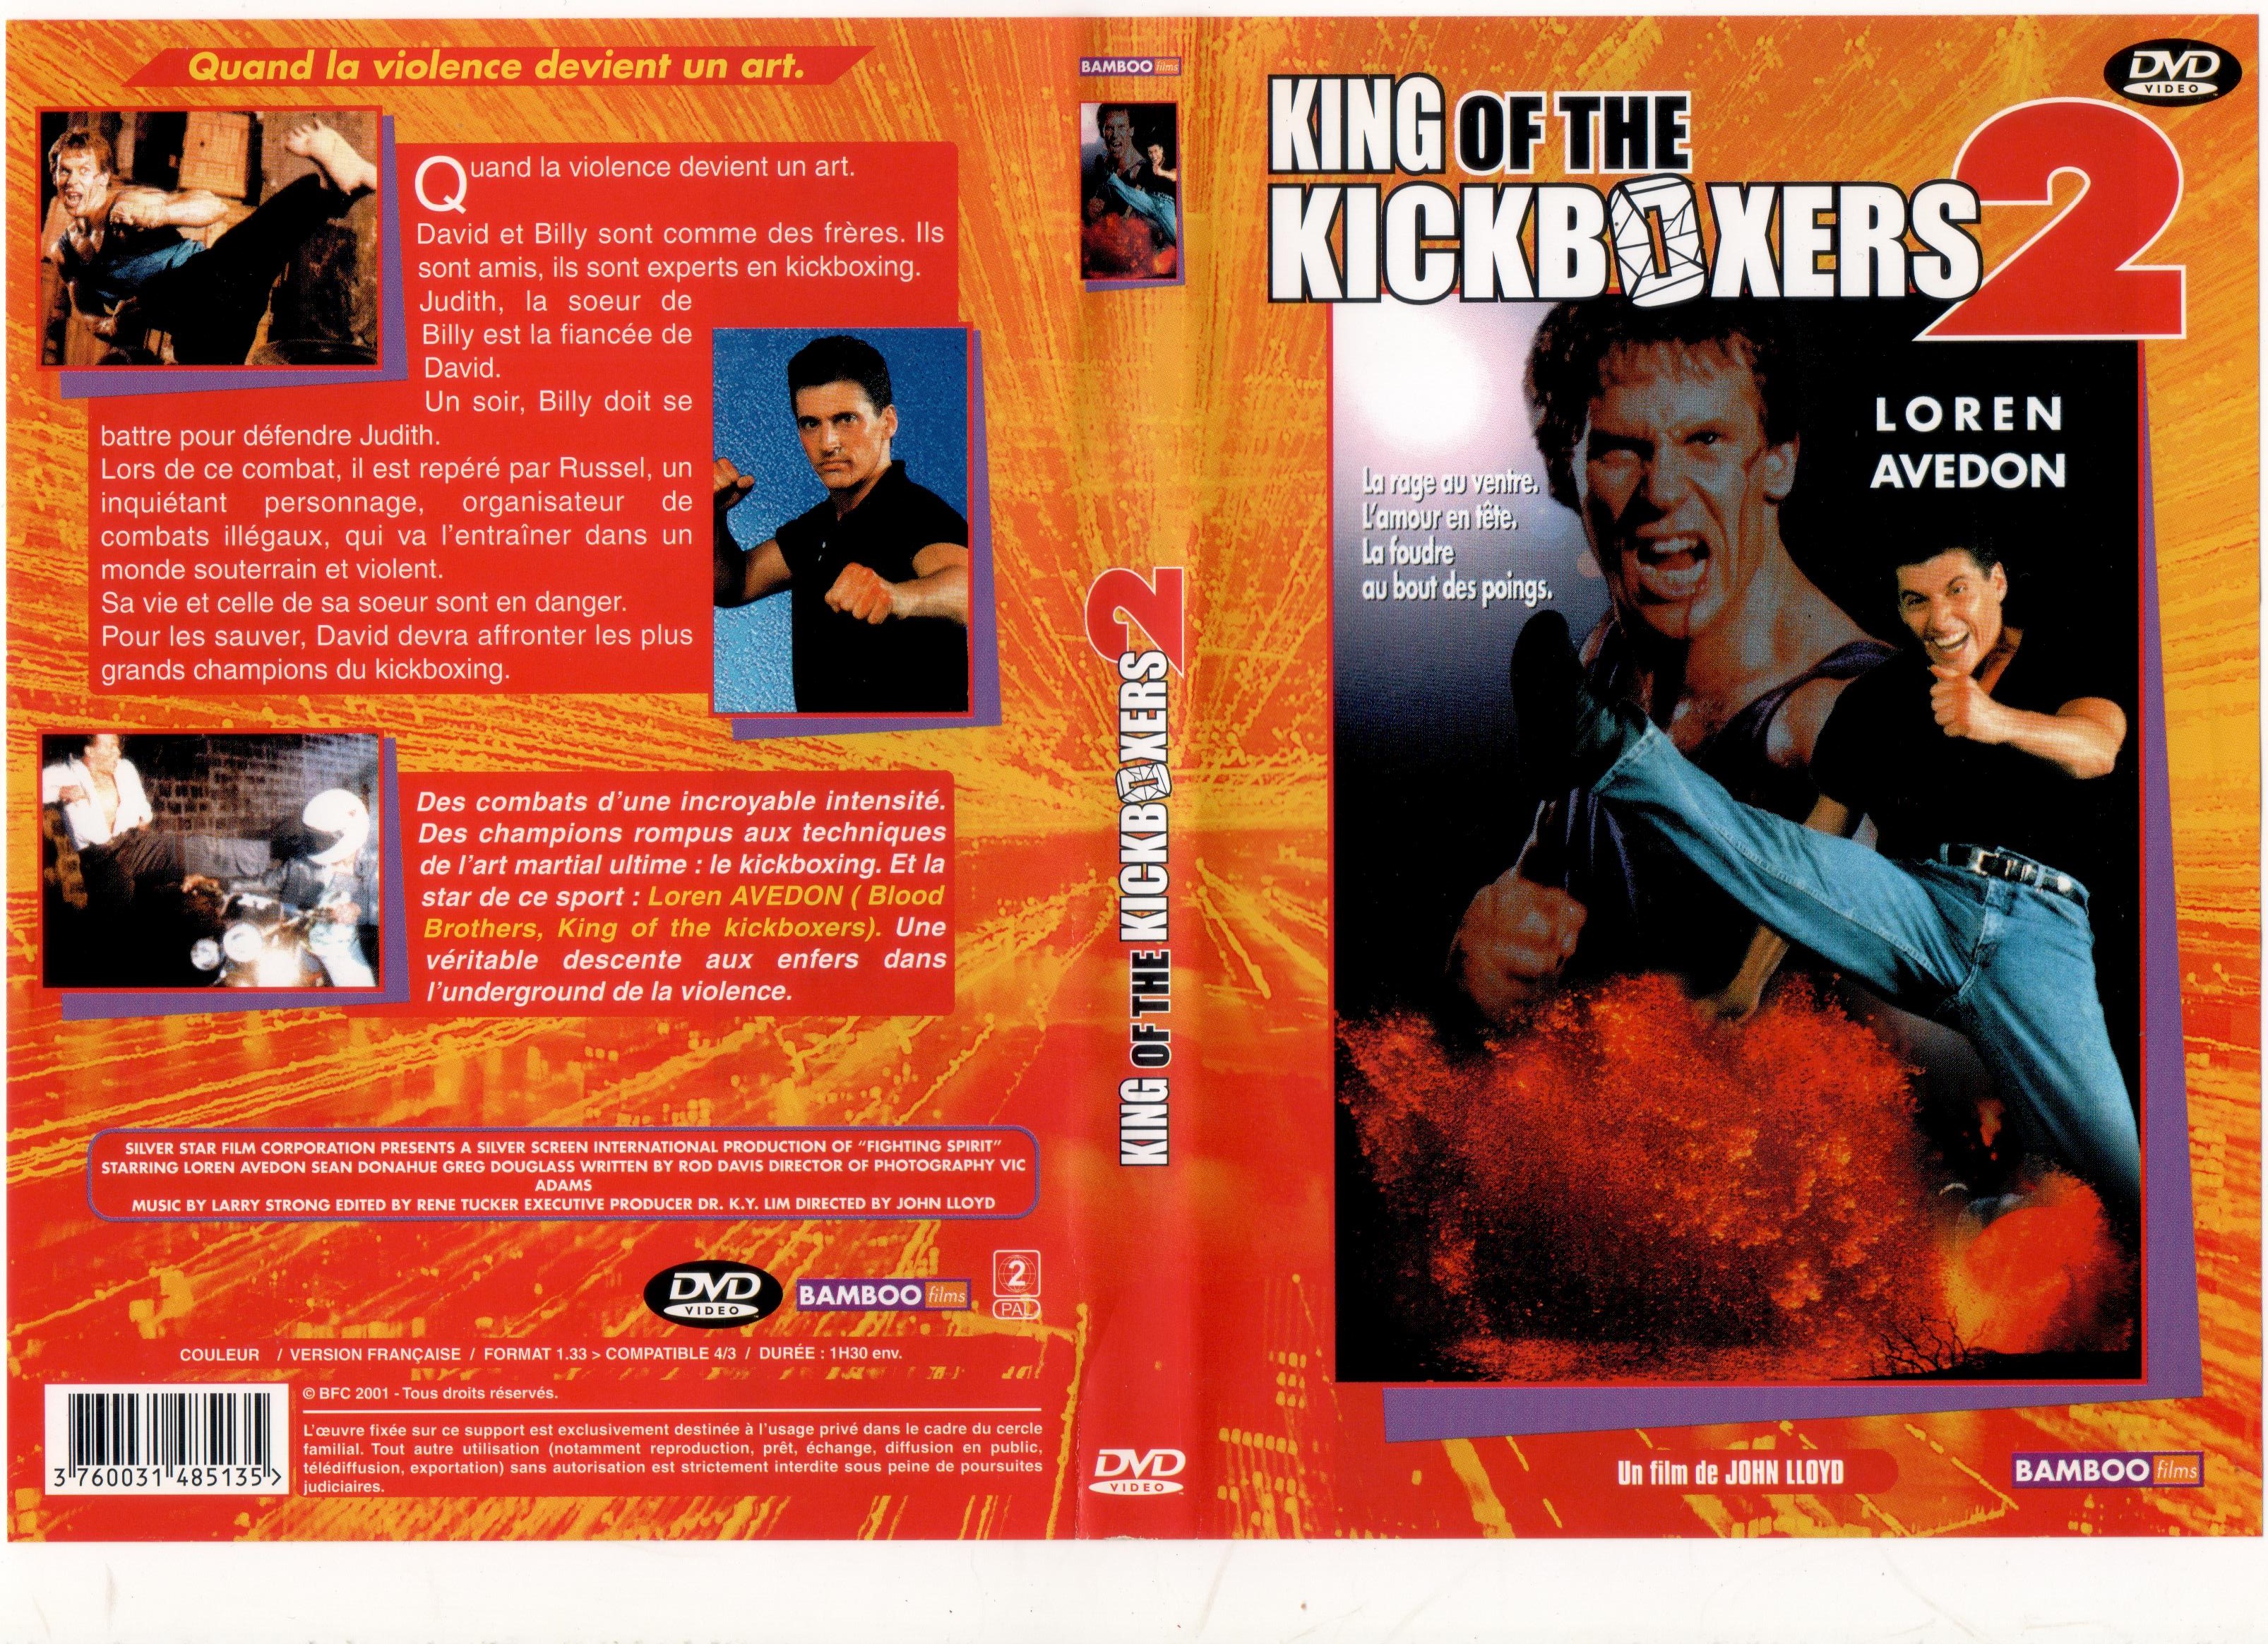 Jaquette DVD Kng of the kickboxers 2